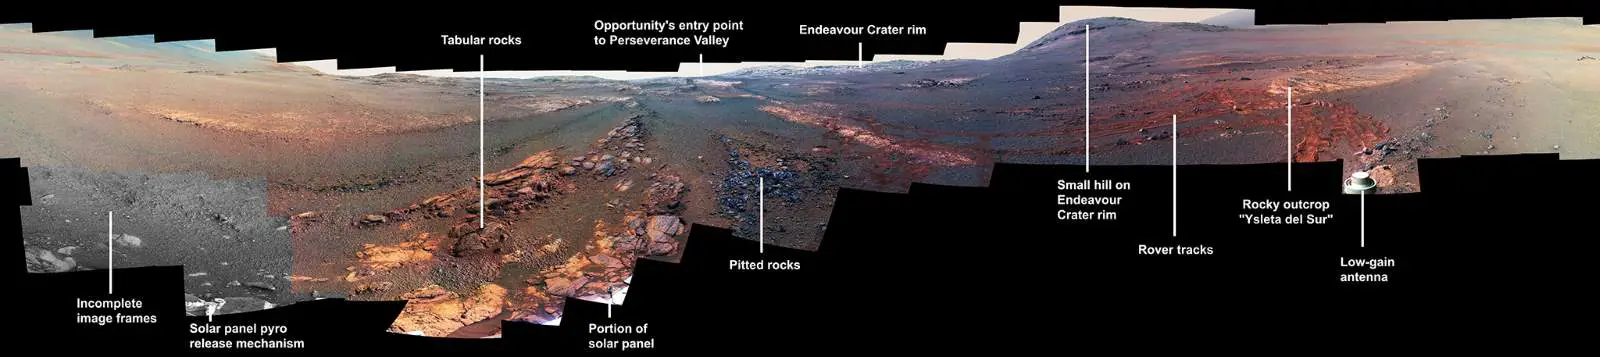 Opportunity Parting Mars Panorama (annotated)